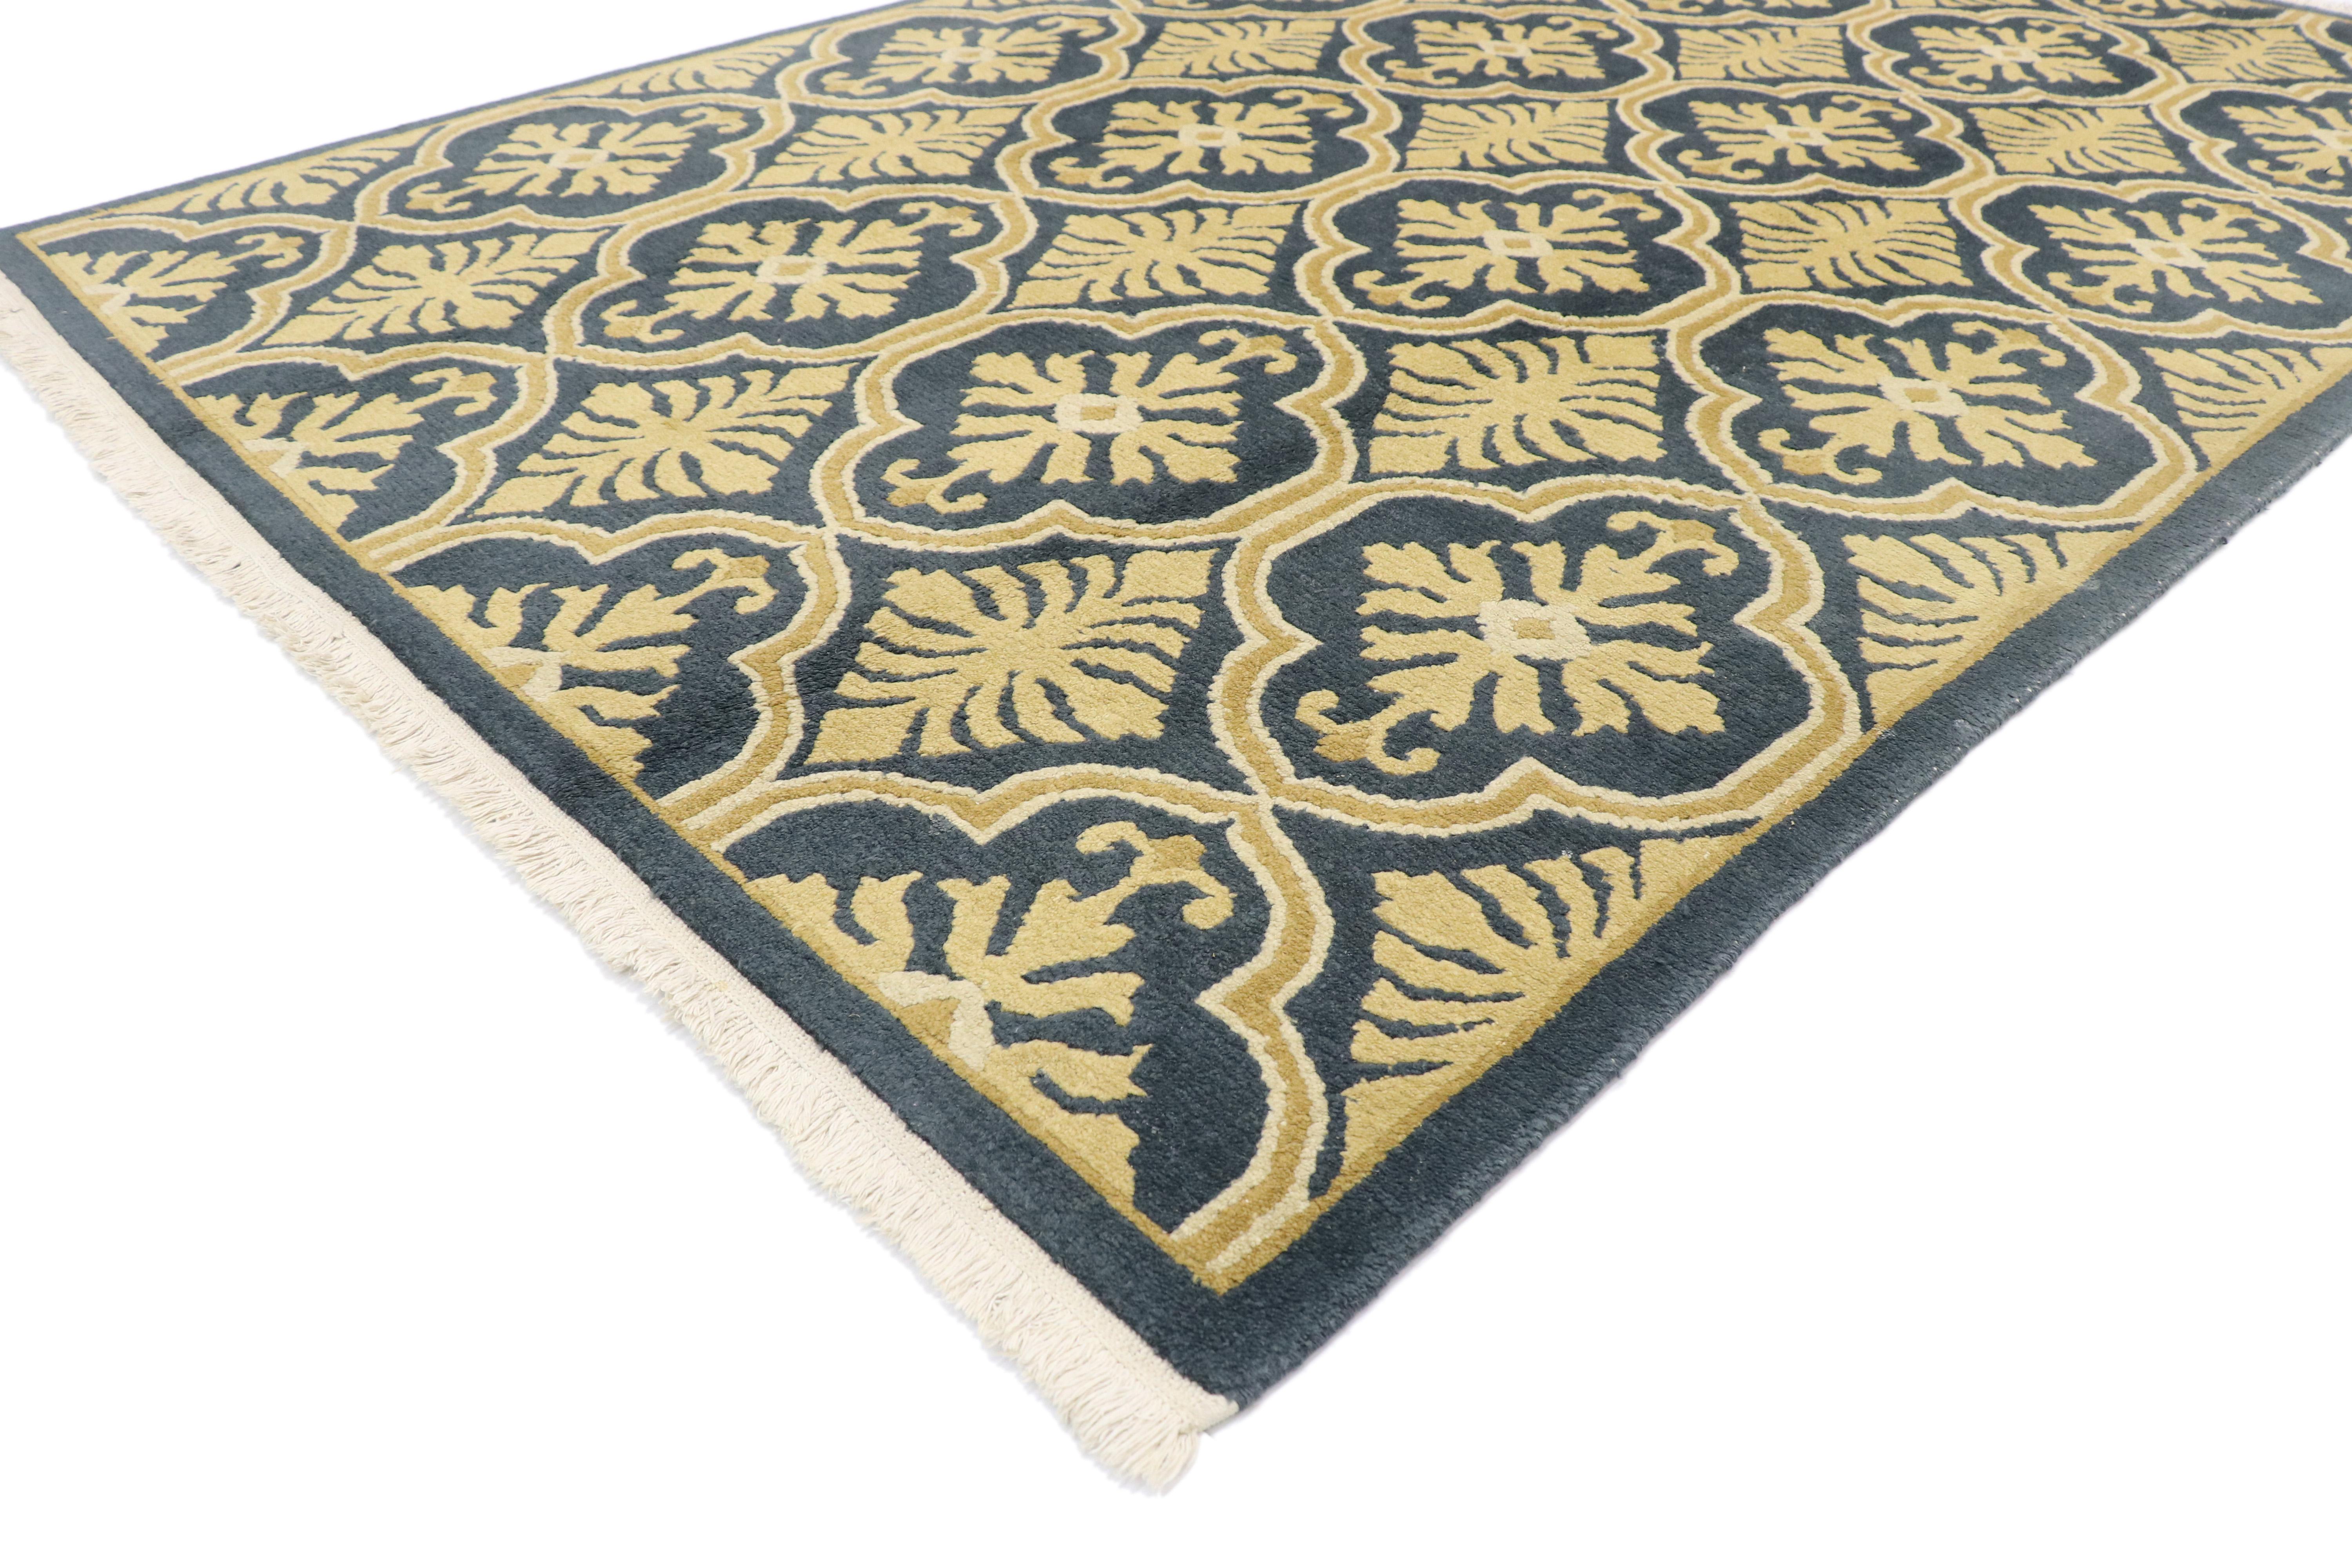 74964 Vintage Transitional Quatrefoil Geometric Damask Pattern rug with Hollywood Regency style. Stately decadence and preppy formality collide in this transitional vintage area rug with Hollywood Regency style. Quatrefoil lobes and abstract flowers